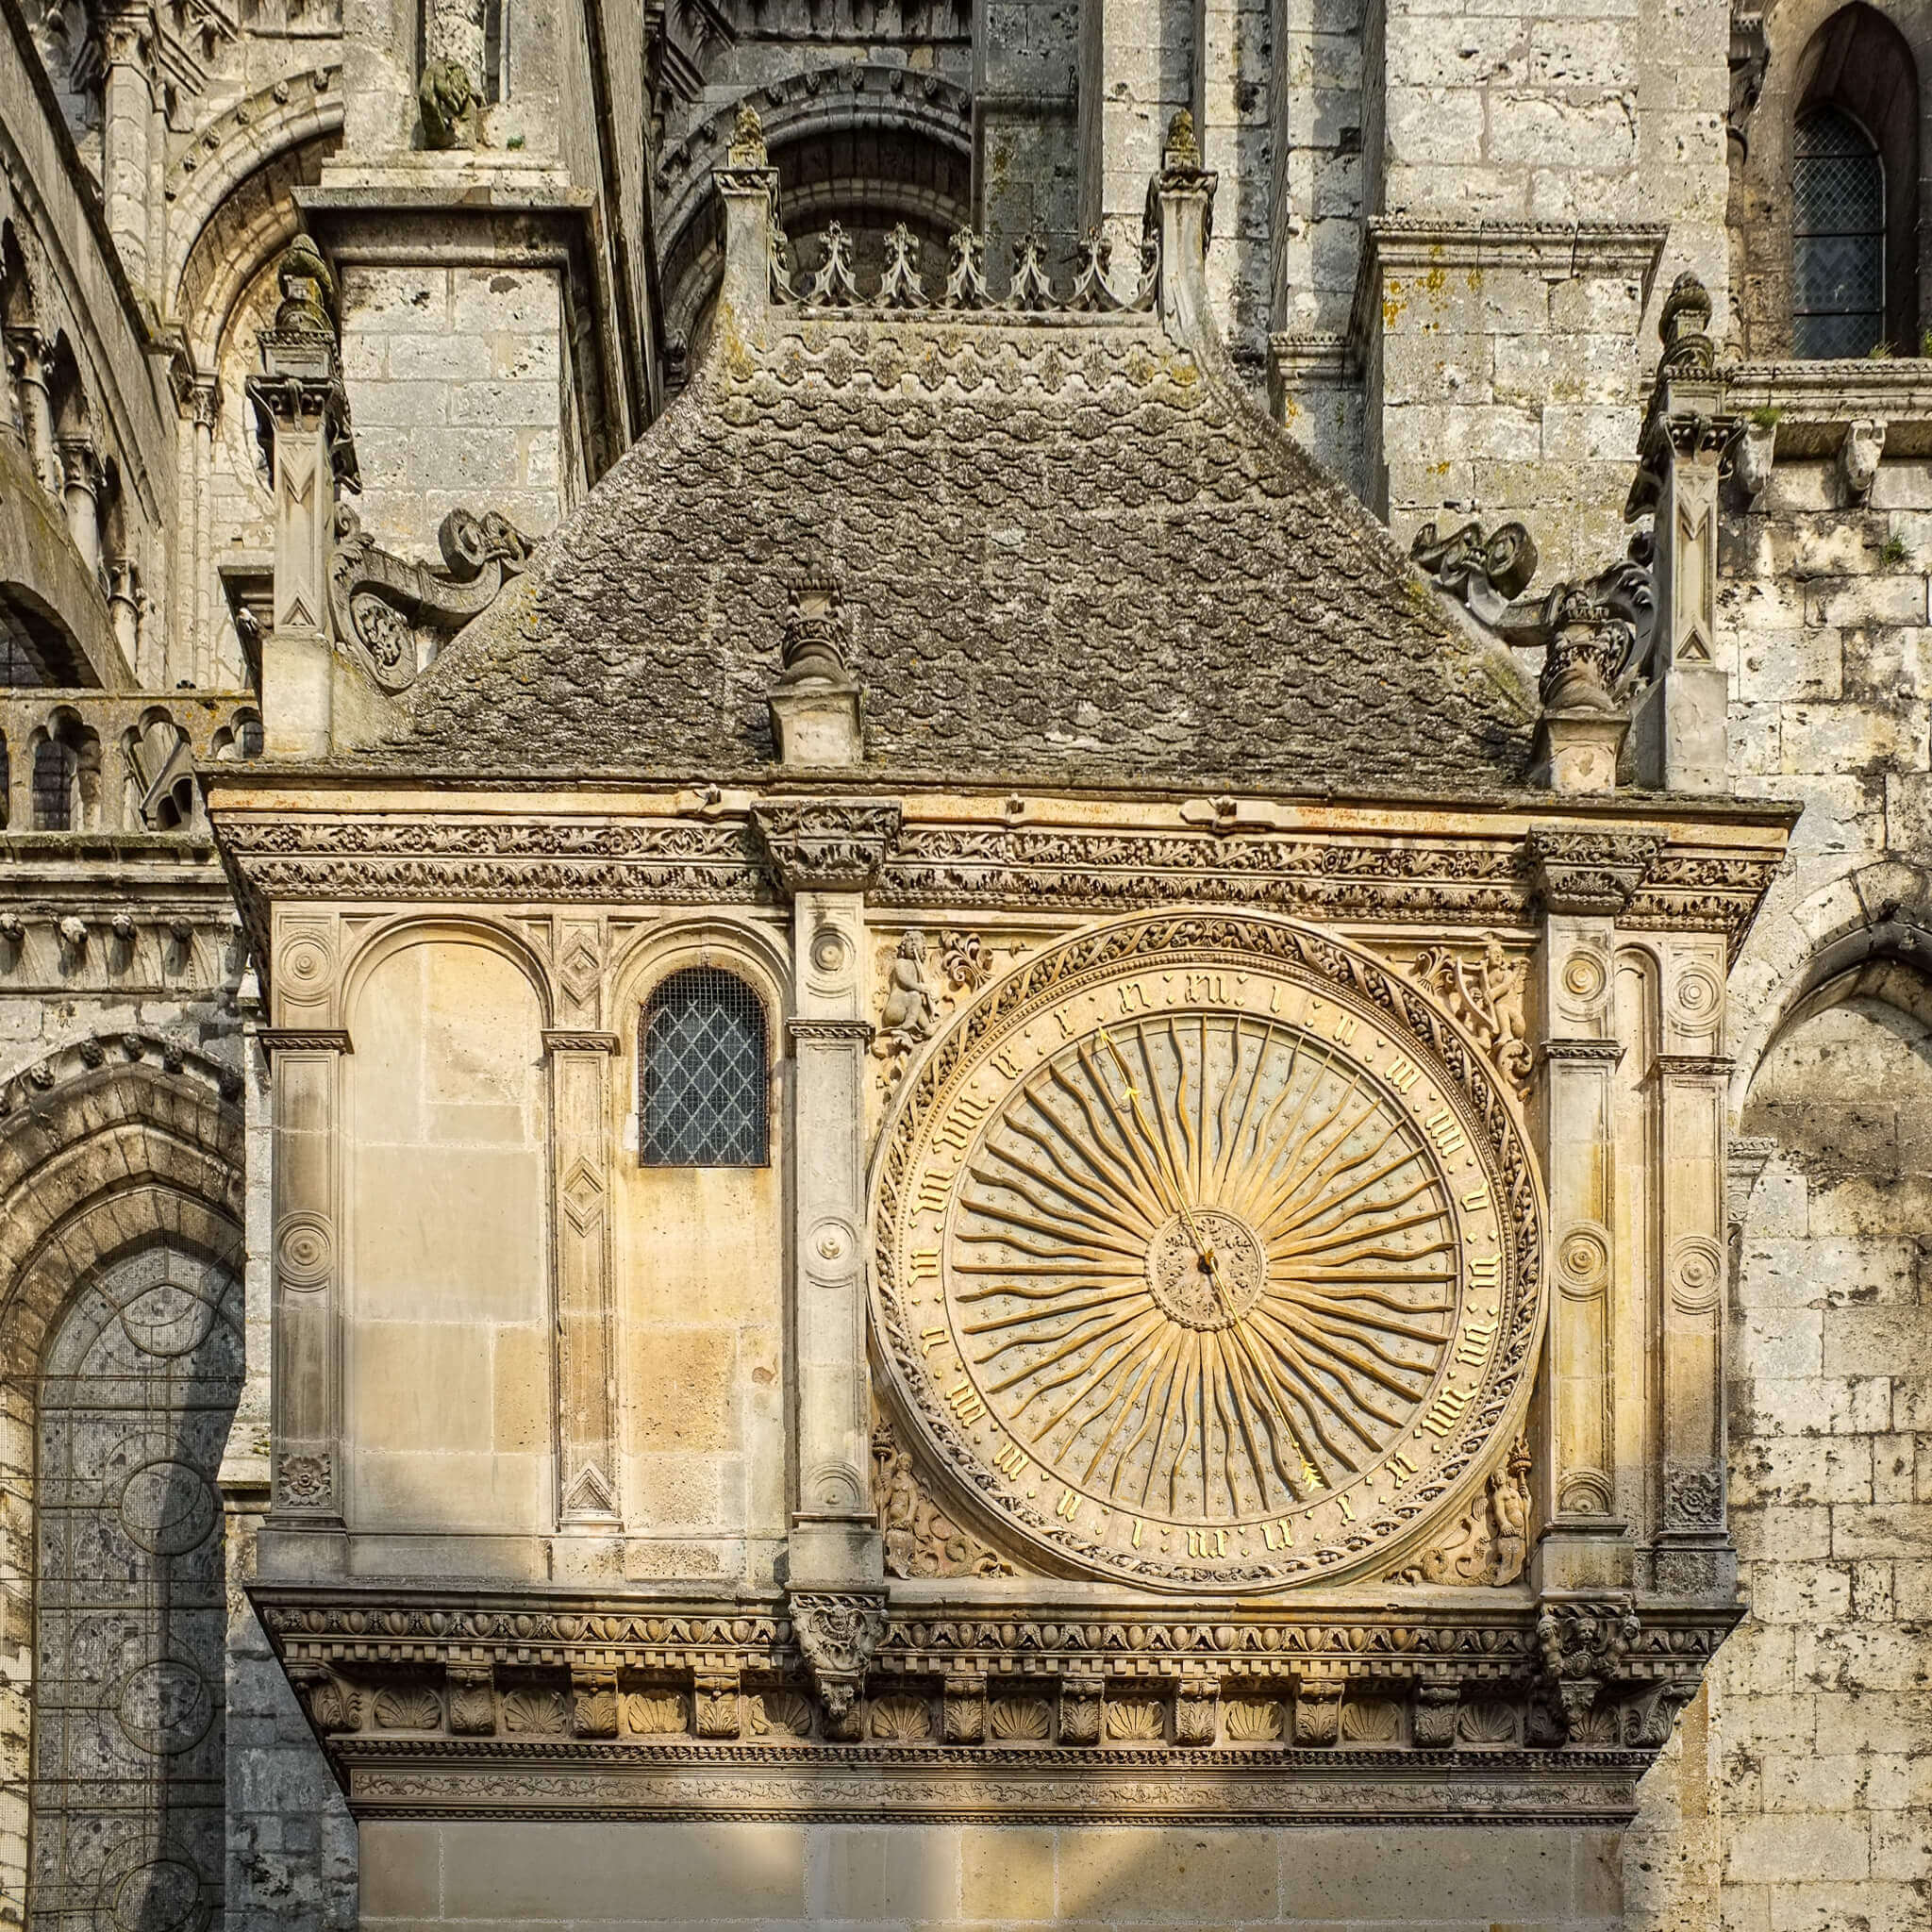 The astronomical clock on the side of the Chartres Cathedral